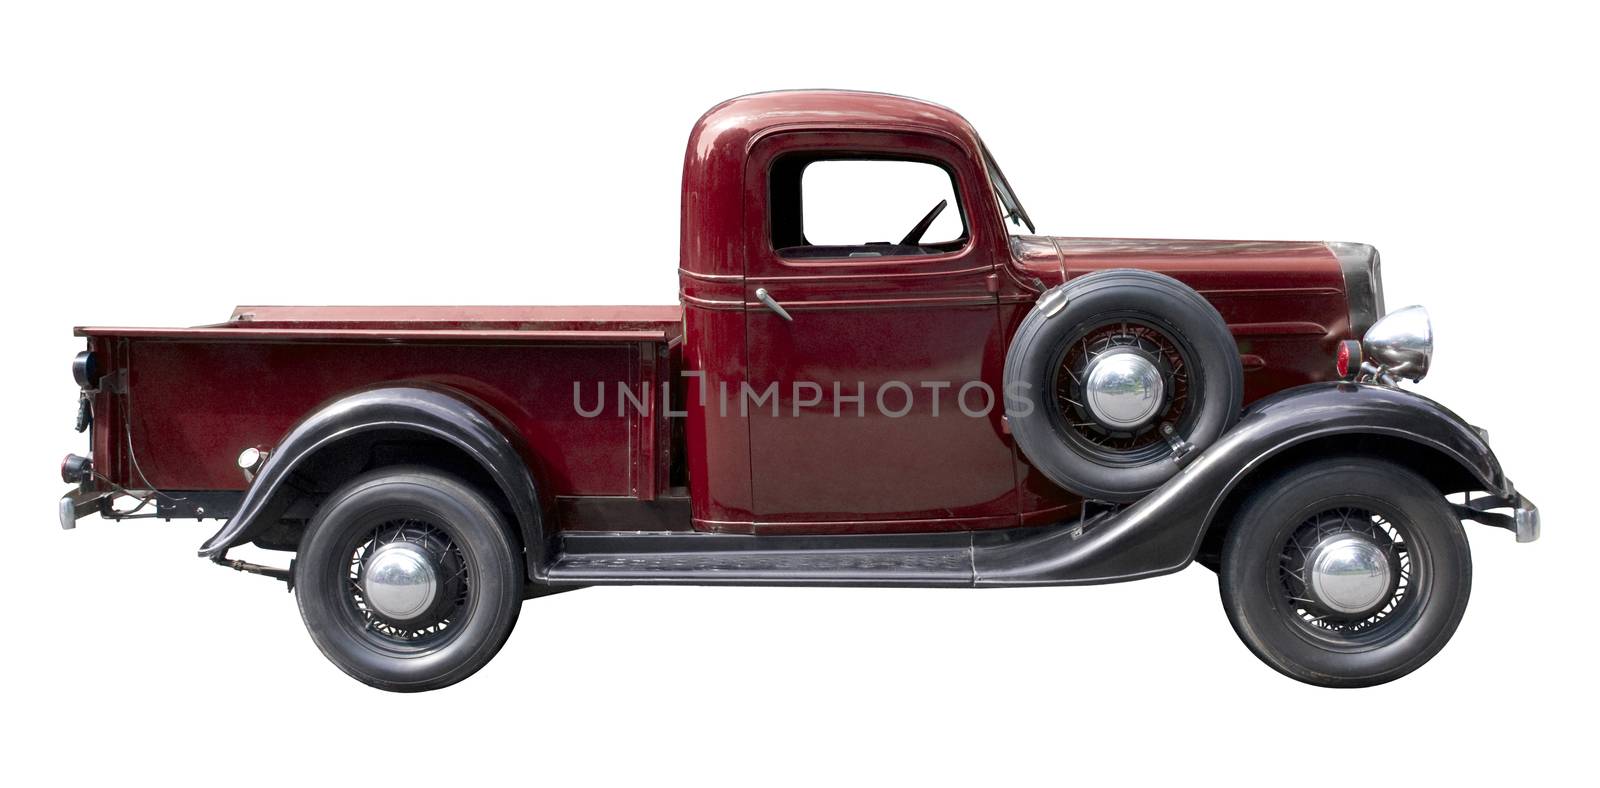 Red vintage pickup truck from 1930s by Balefire9